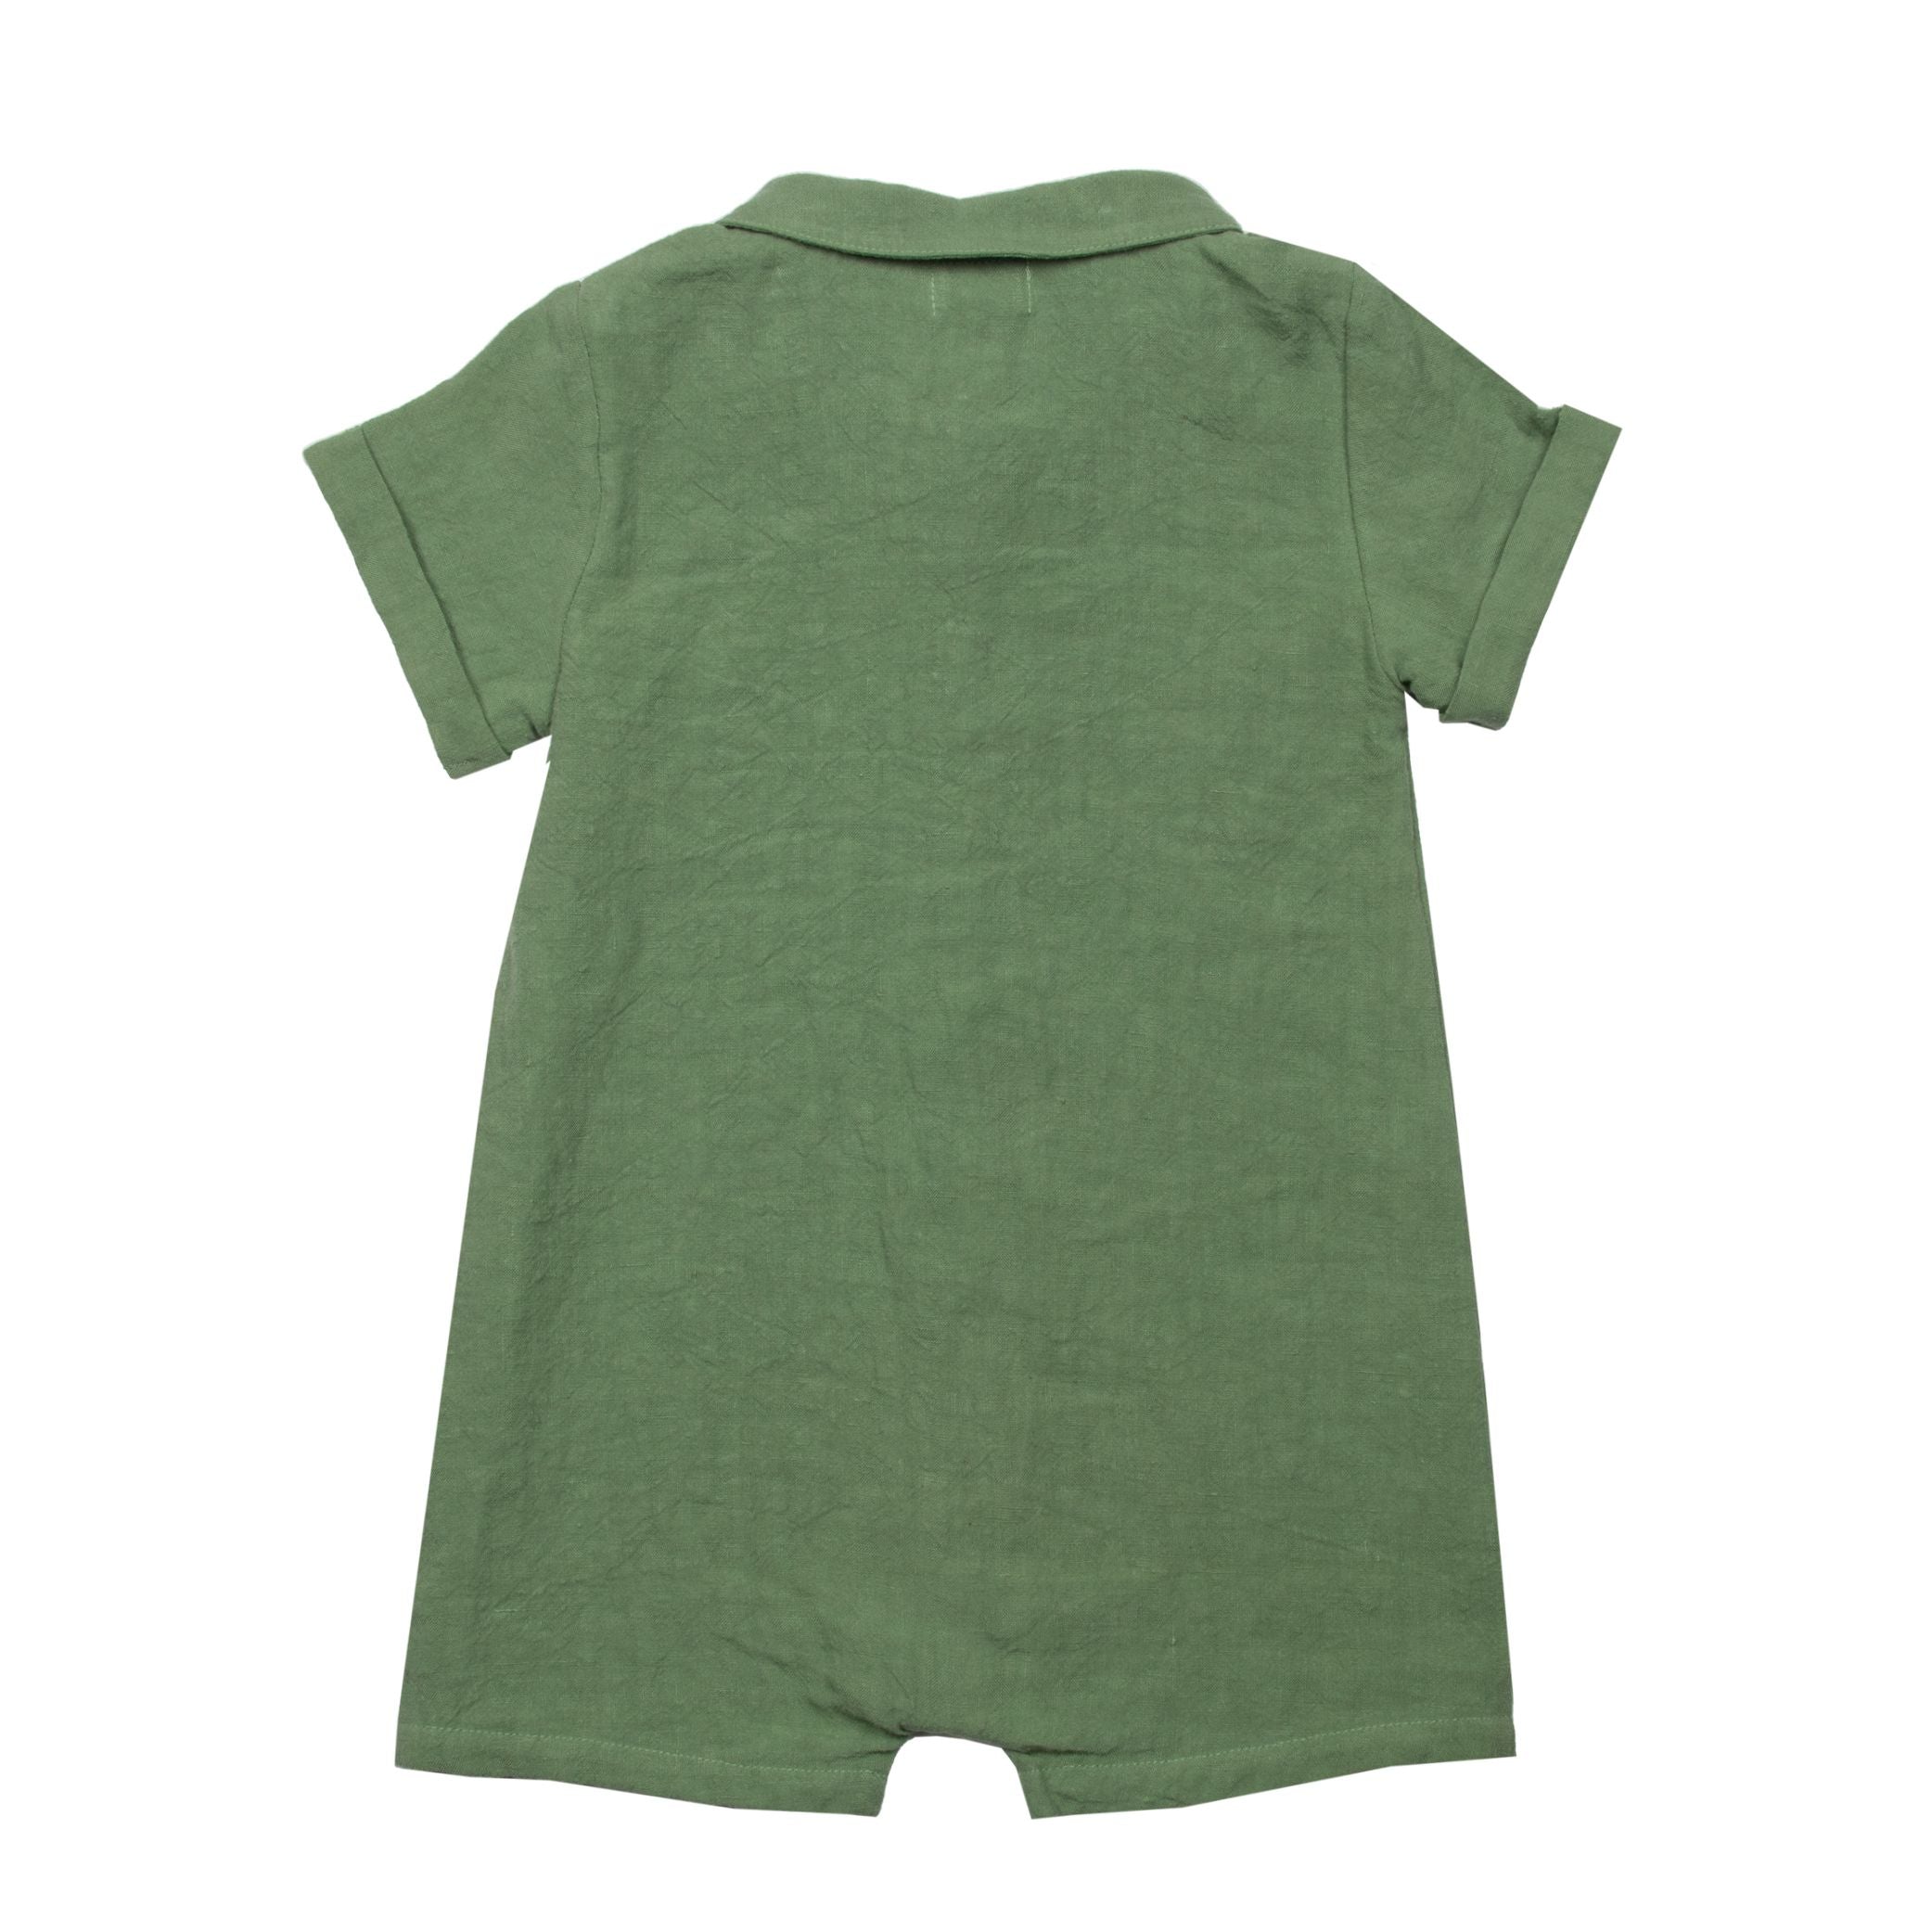 Suuky Porto Green Linen Romper, Oyster Buttons. Premium Portuguese linen. made in Portugal. Sizes 3-6 months to 18-24 months. Short sleeve with collar. Perfect for polo club, palm beach vacation, garden wedding. First birthday gift. free shipping to Canada and the US on orders over $100, with standard shipping rates of $6 CAD / $4.30 USD for orders below. Plus, rest assured, duties into the United States are included